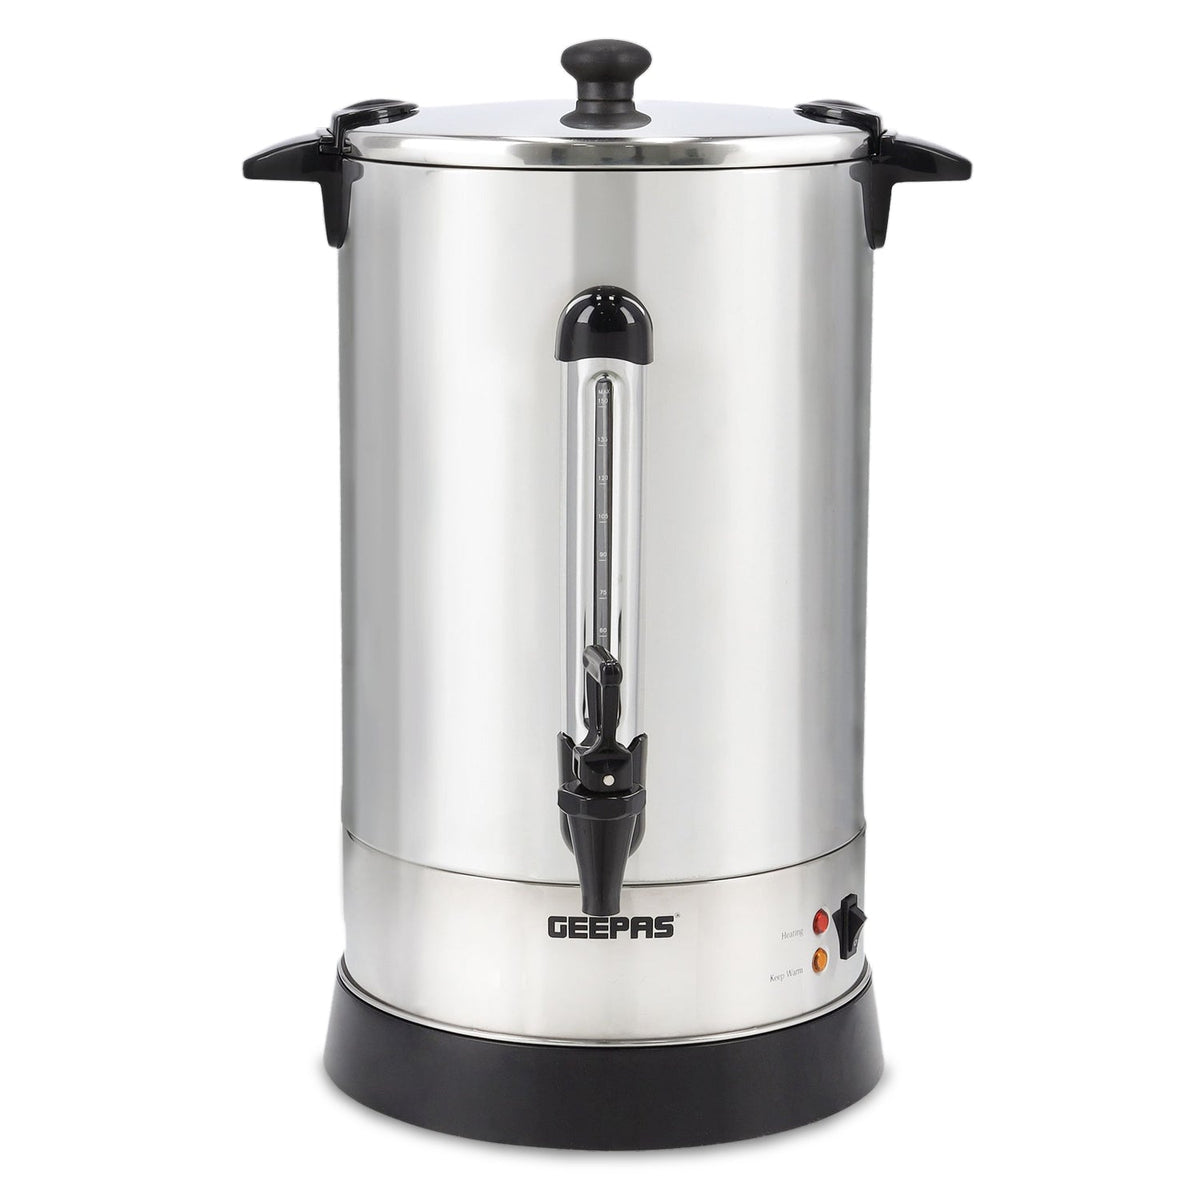 Electric 15L Catering Hot Water Boiler Commercial Coffee Tea Urn